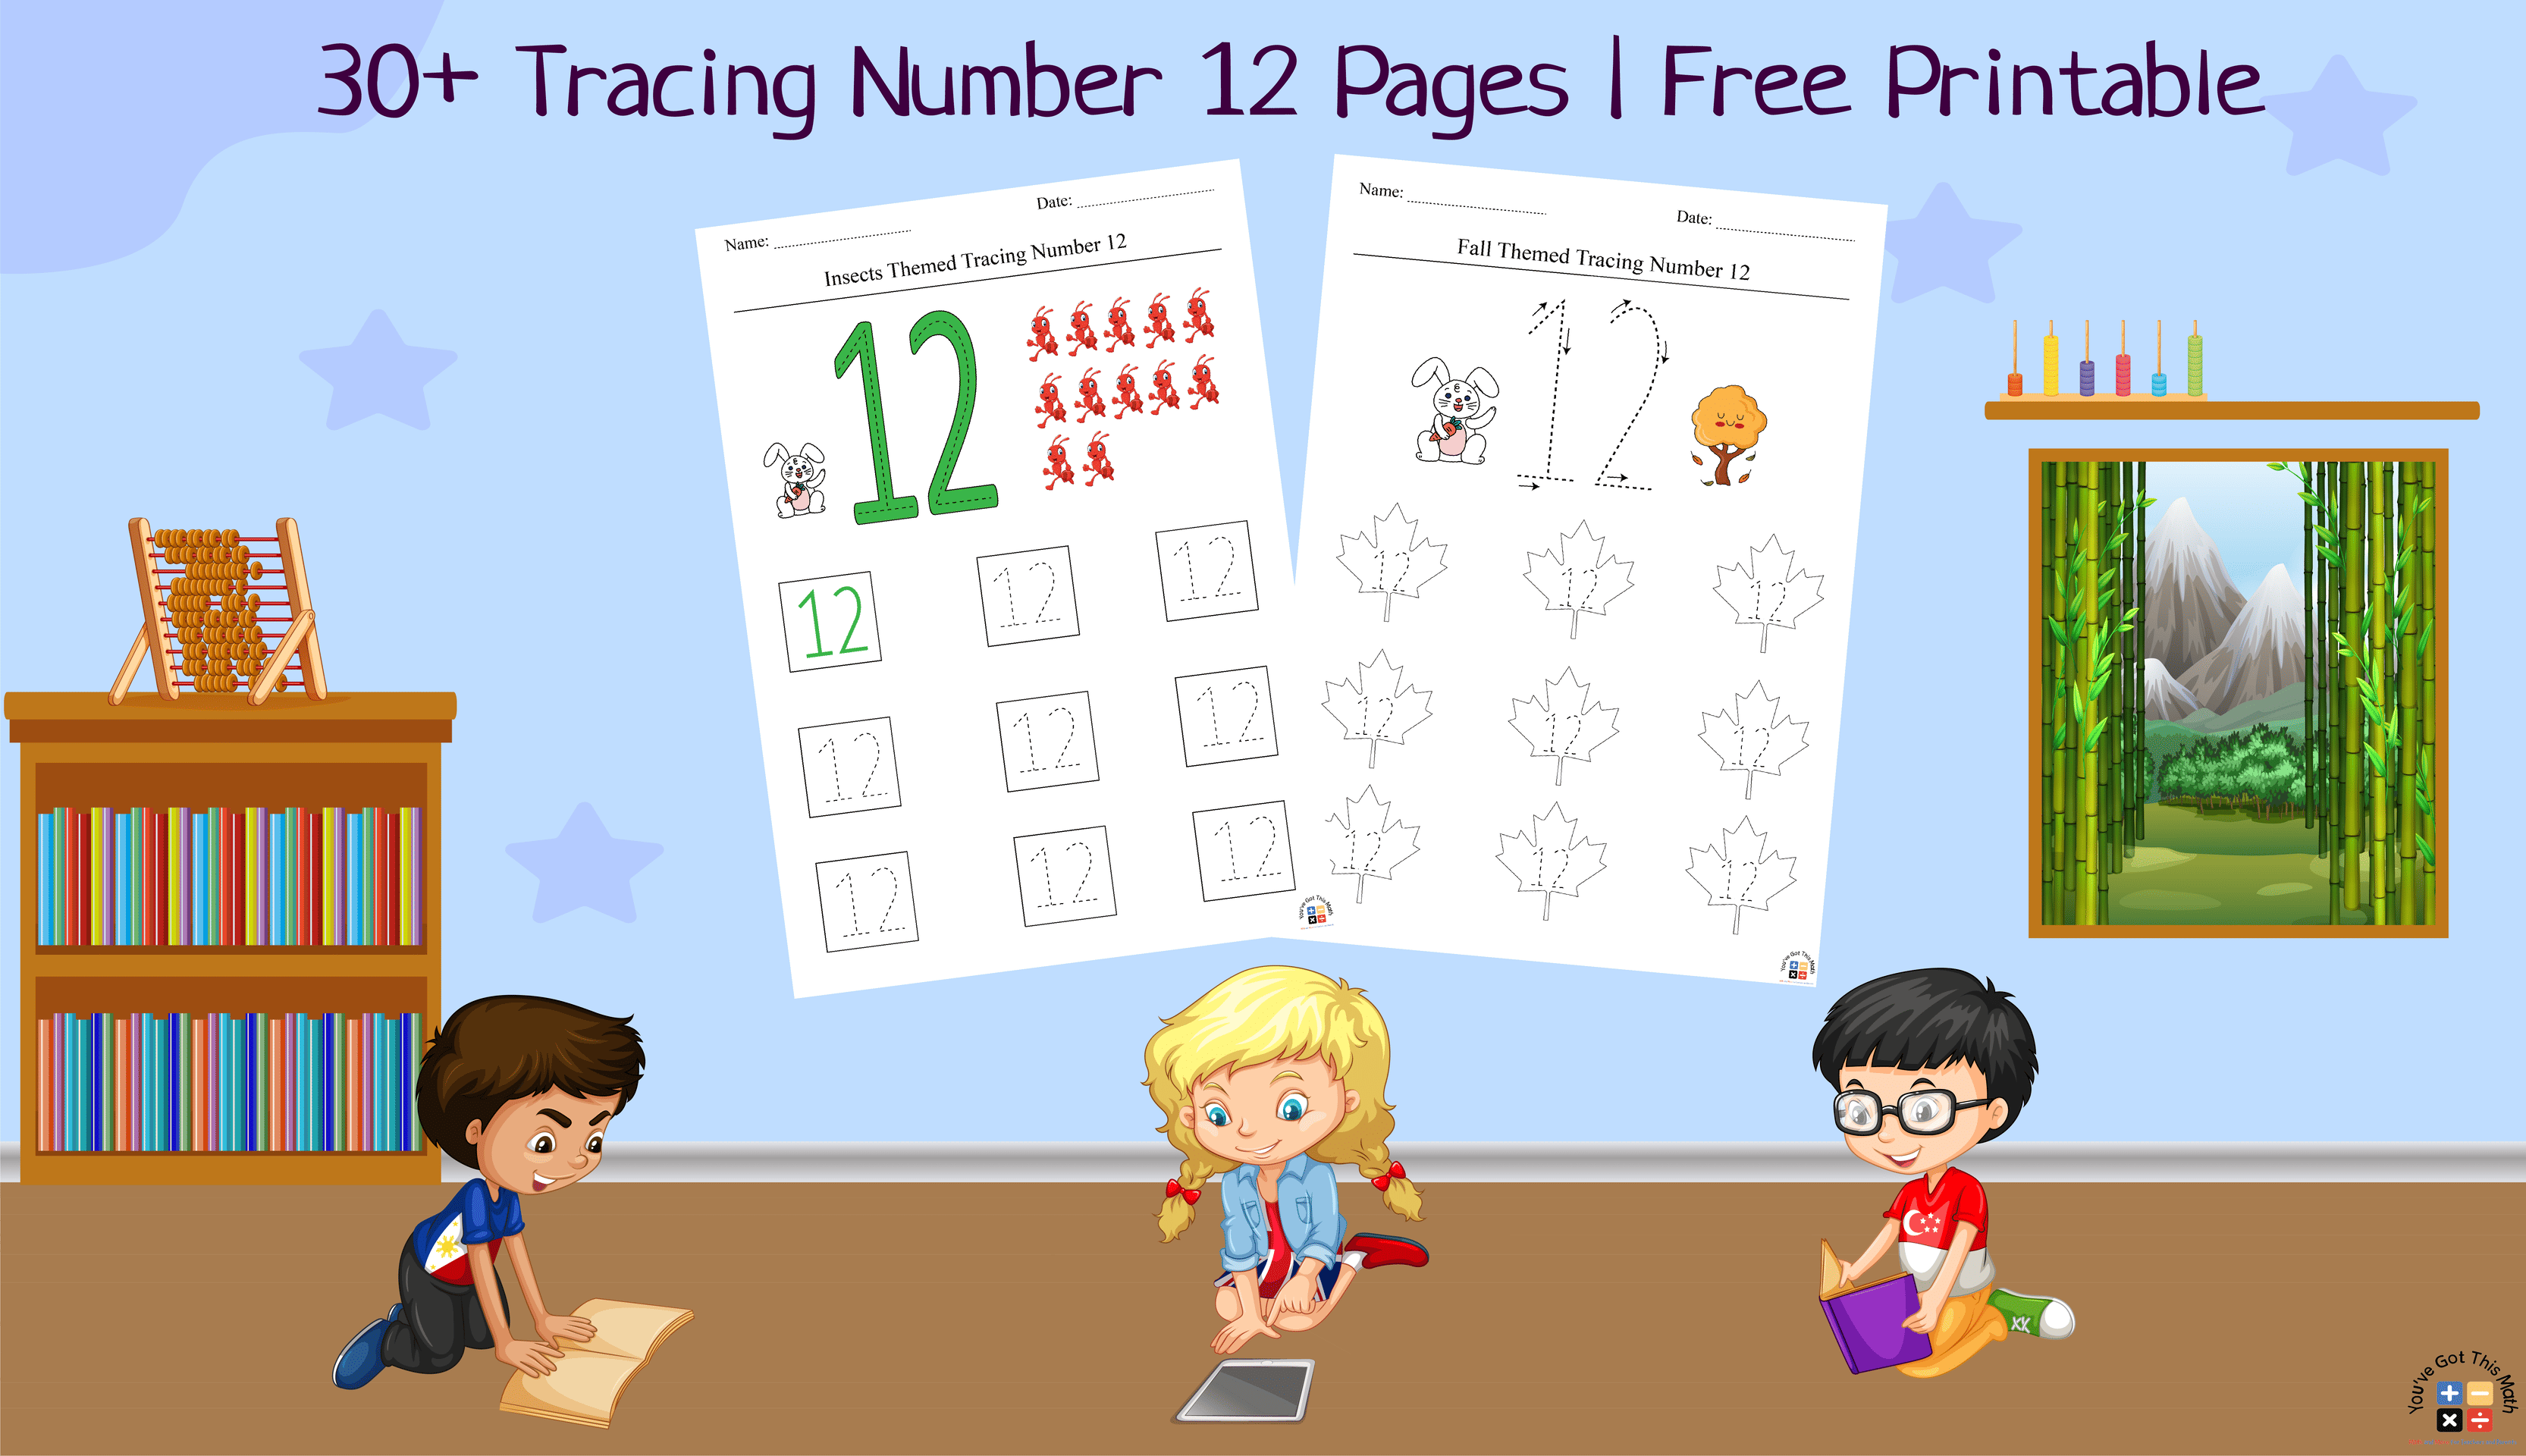 30+ Tracing Number 12 Pages | Free Printable